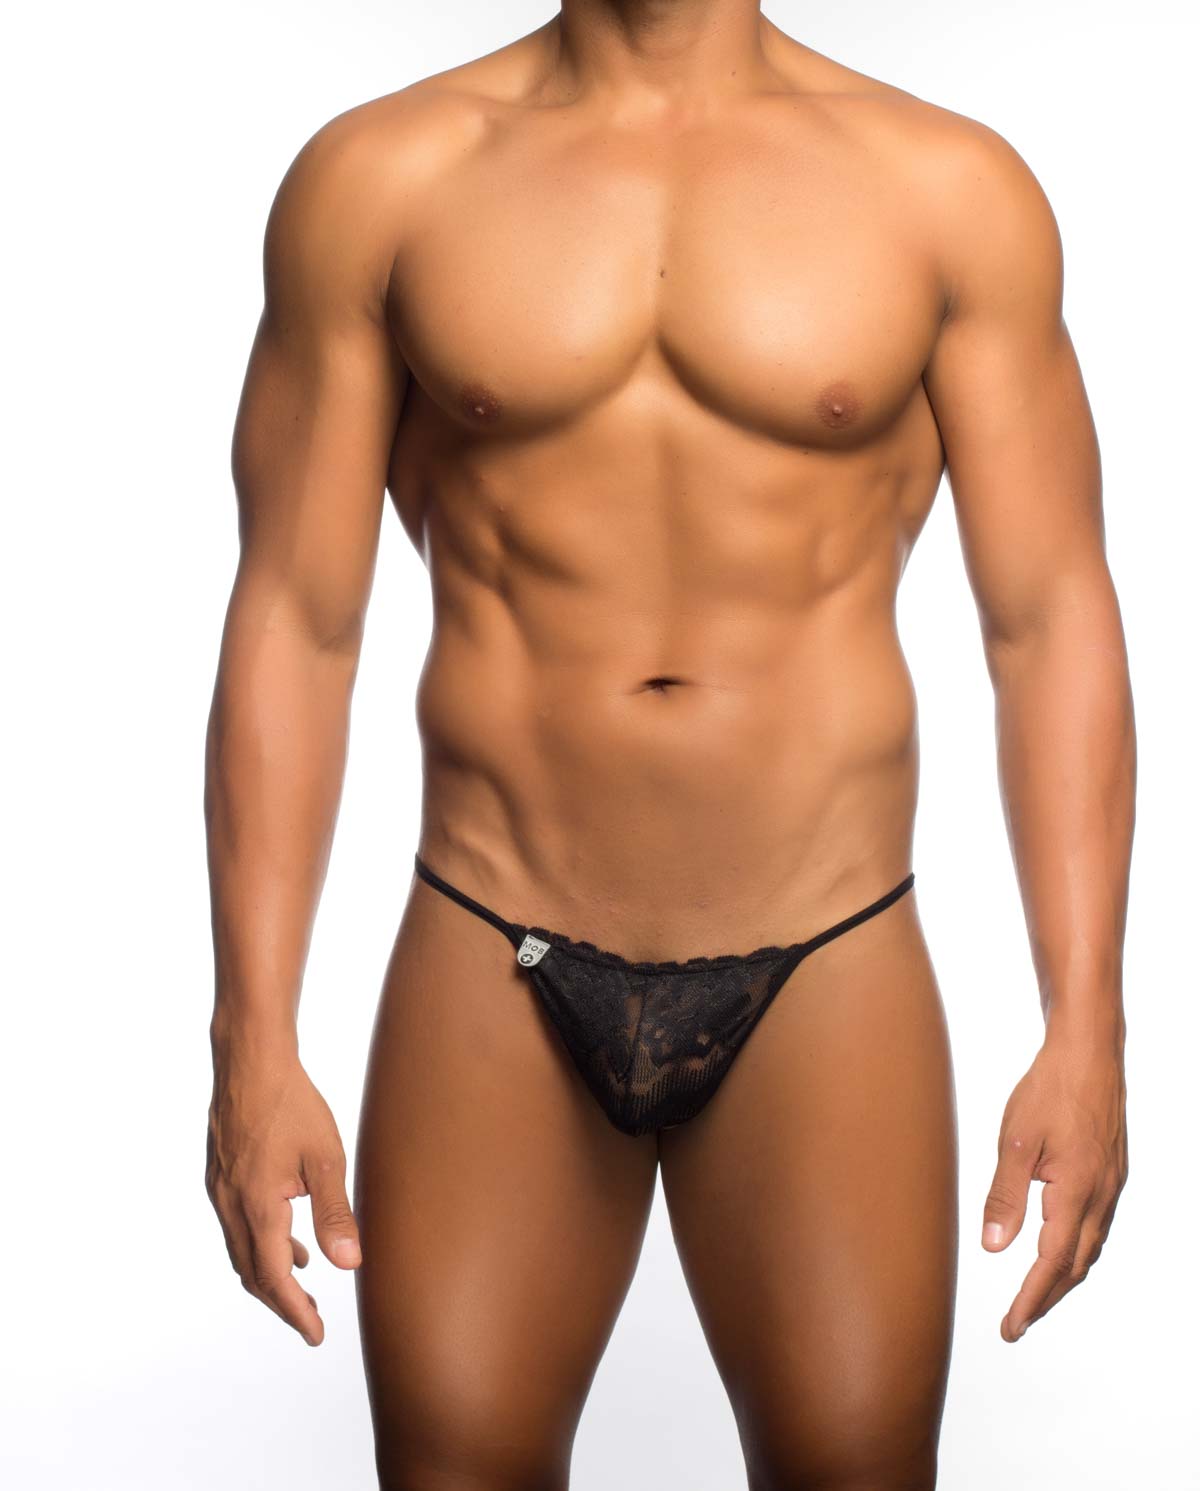 MOB Men's Lace Thong available at www.MensUnderwear.io - 1